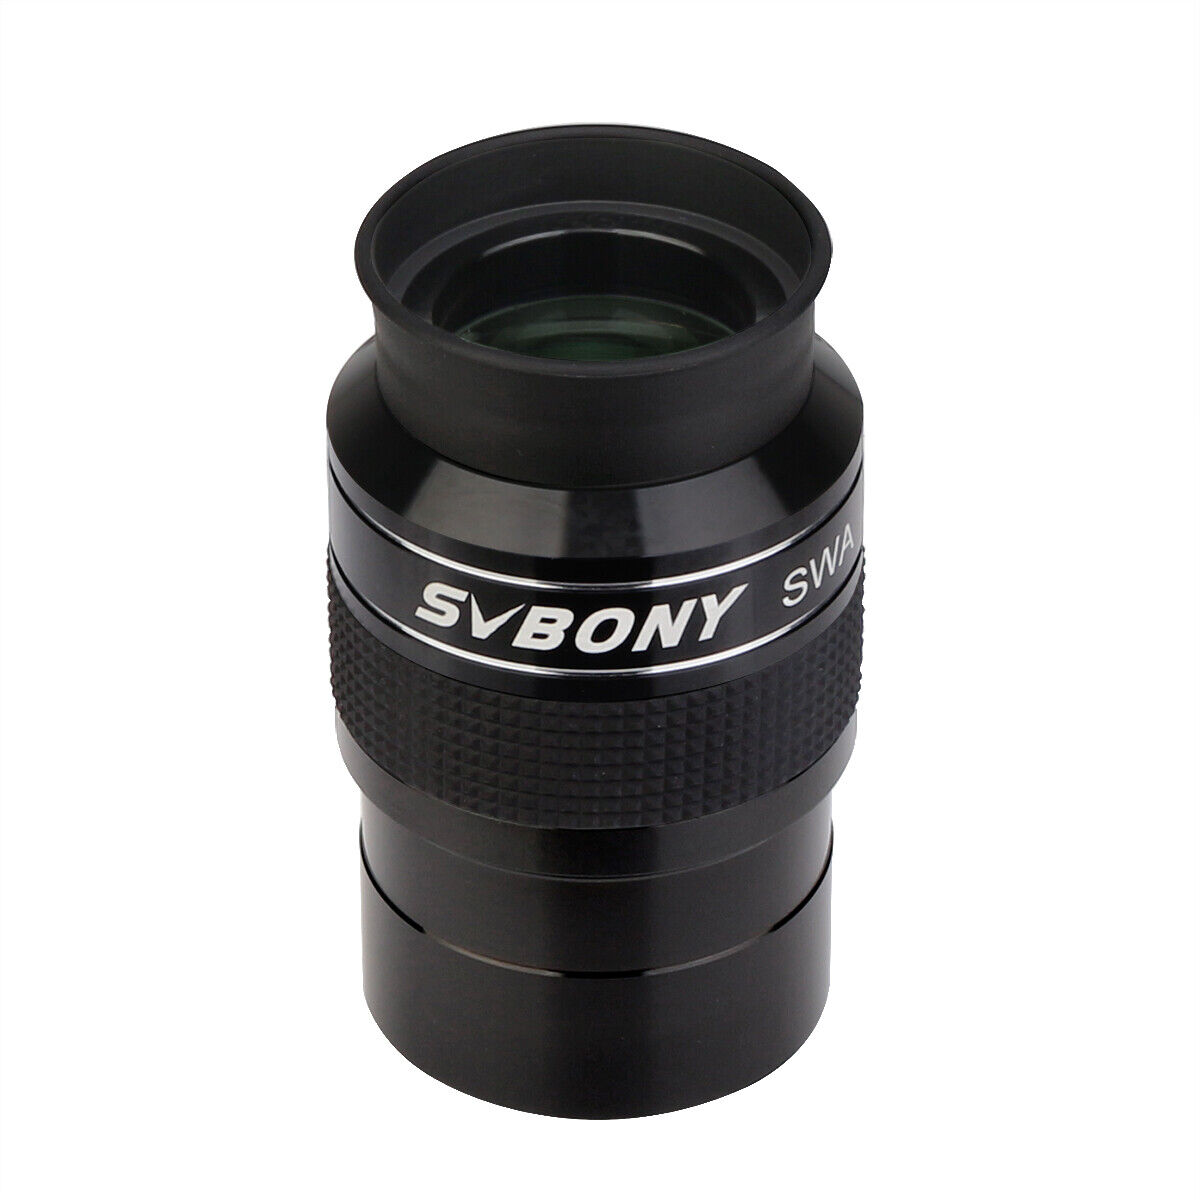 SVBONY SV154 2inch 70° SWA 26mm Super Wide Angle Eyepiece for Deep-Space Images